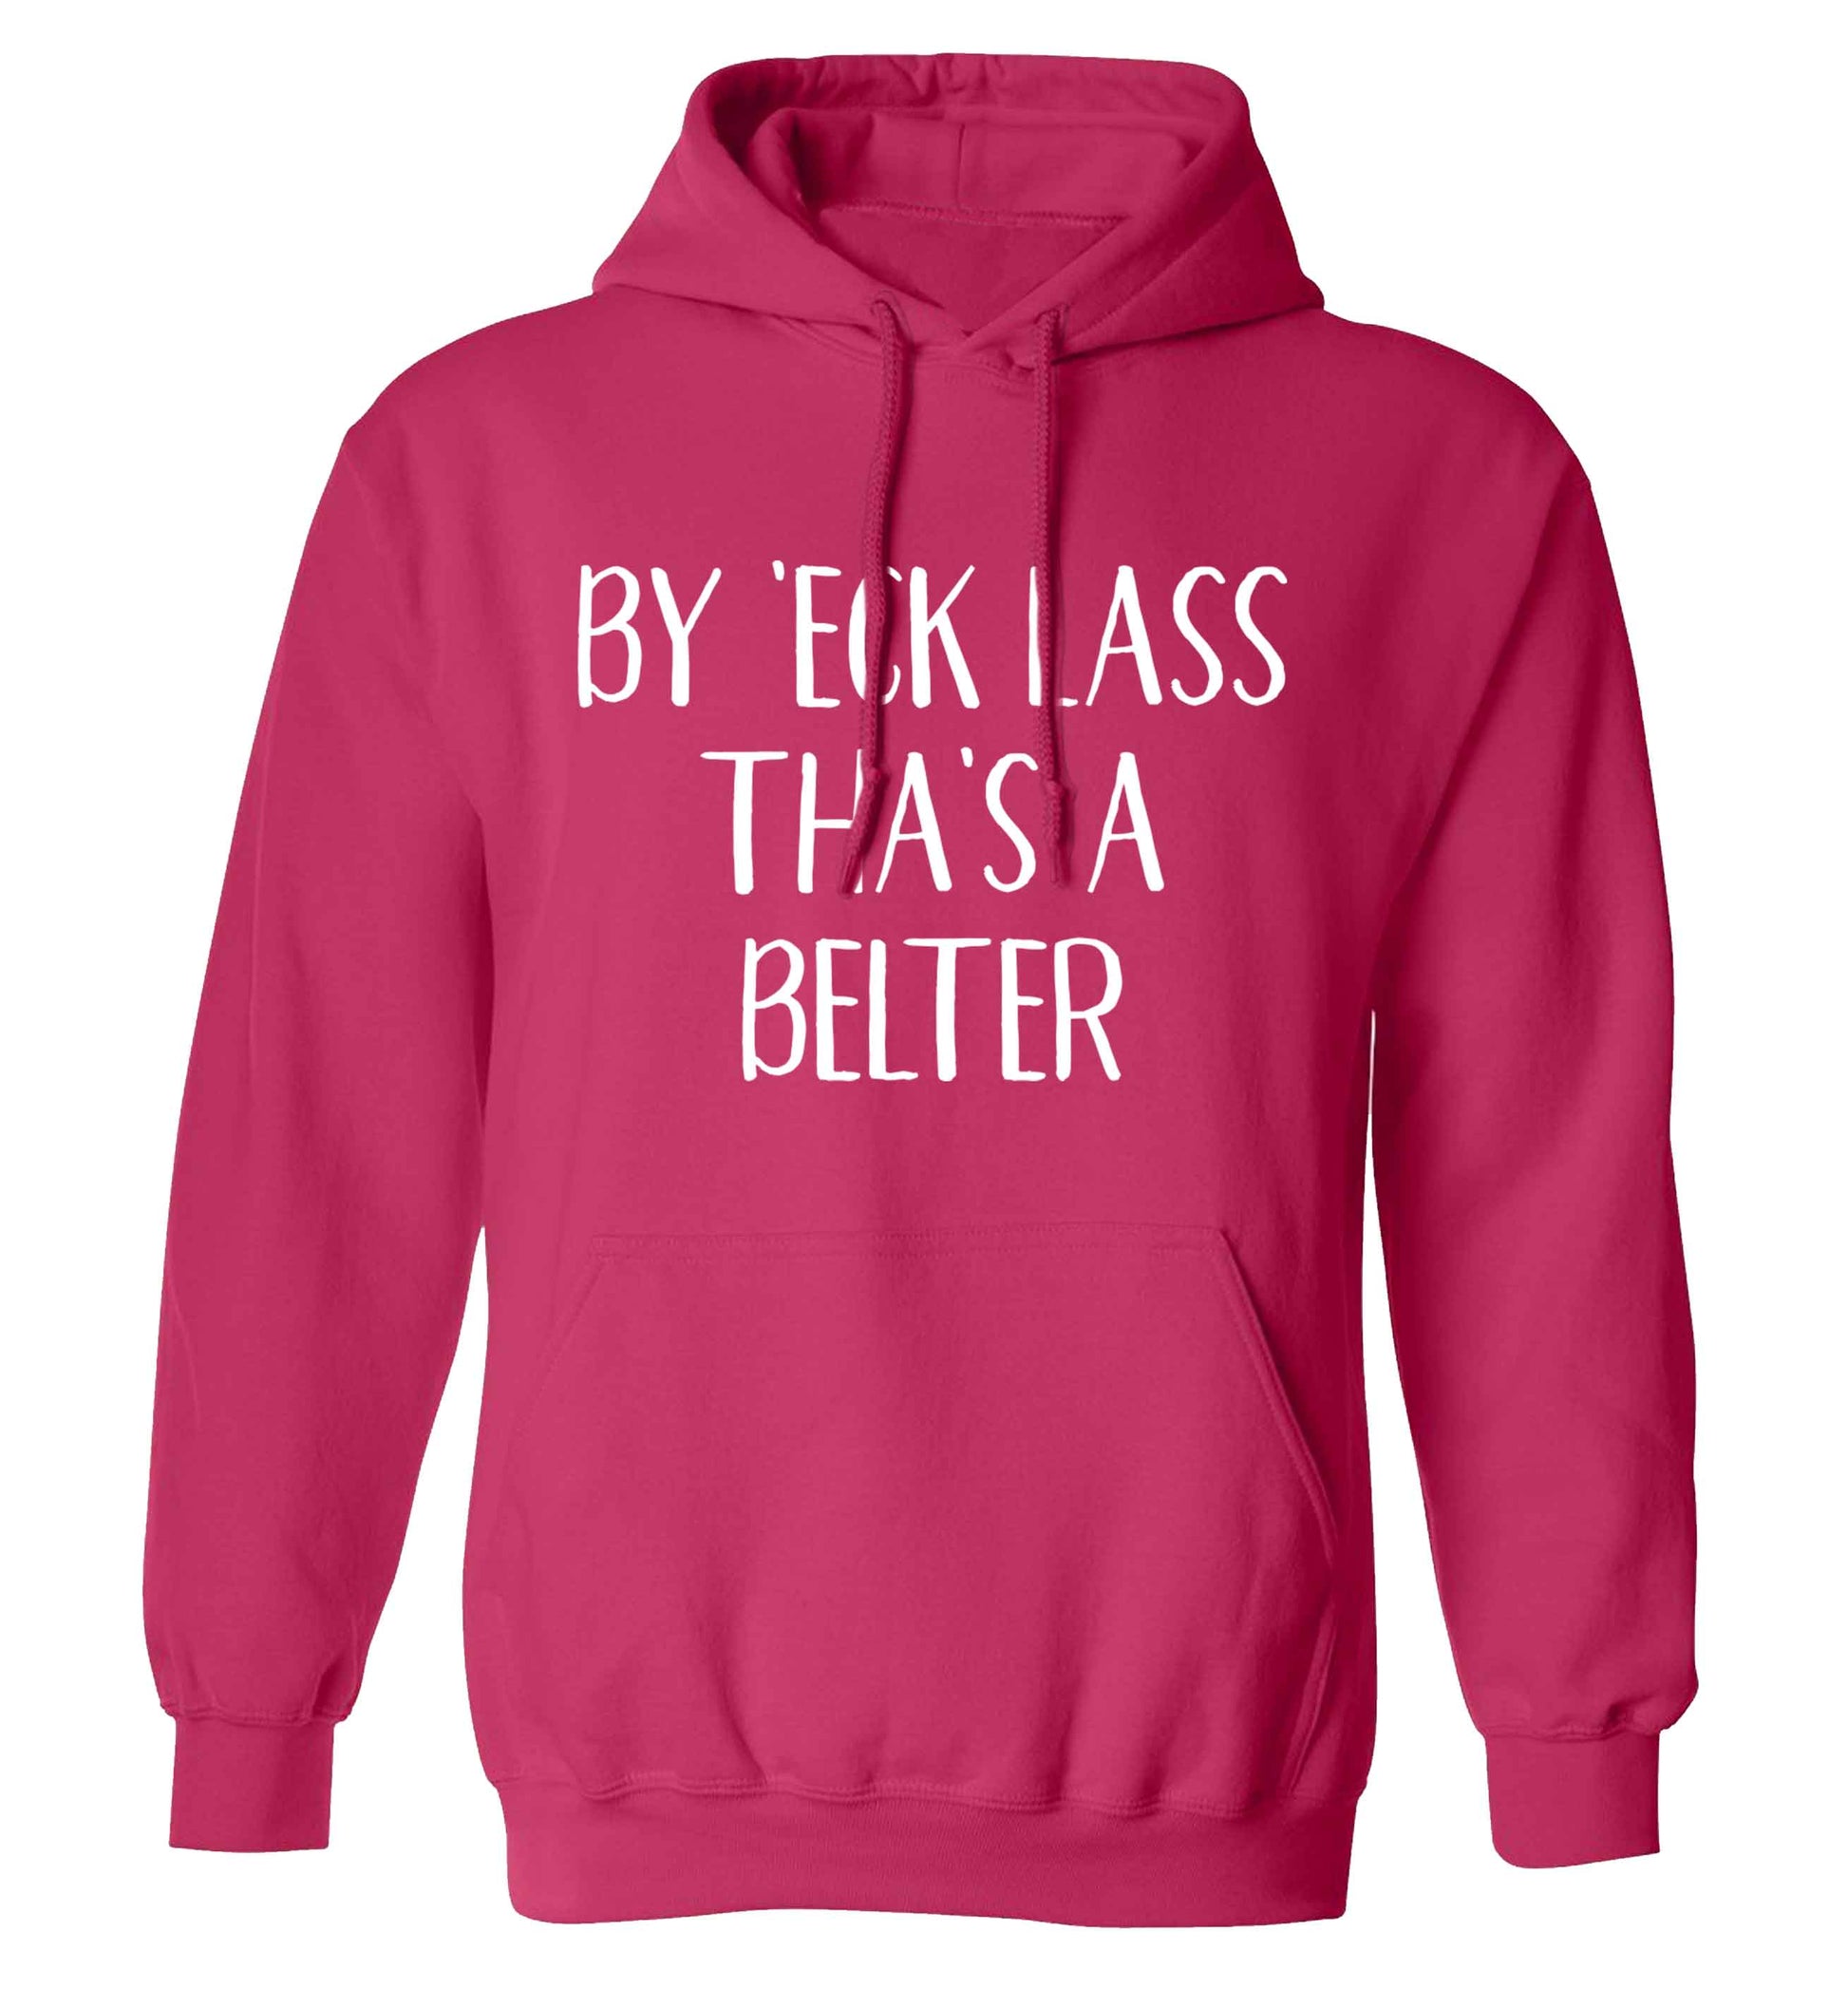 Be 'eck lass tha's a belter adults unisex pink hoodie 2XL